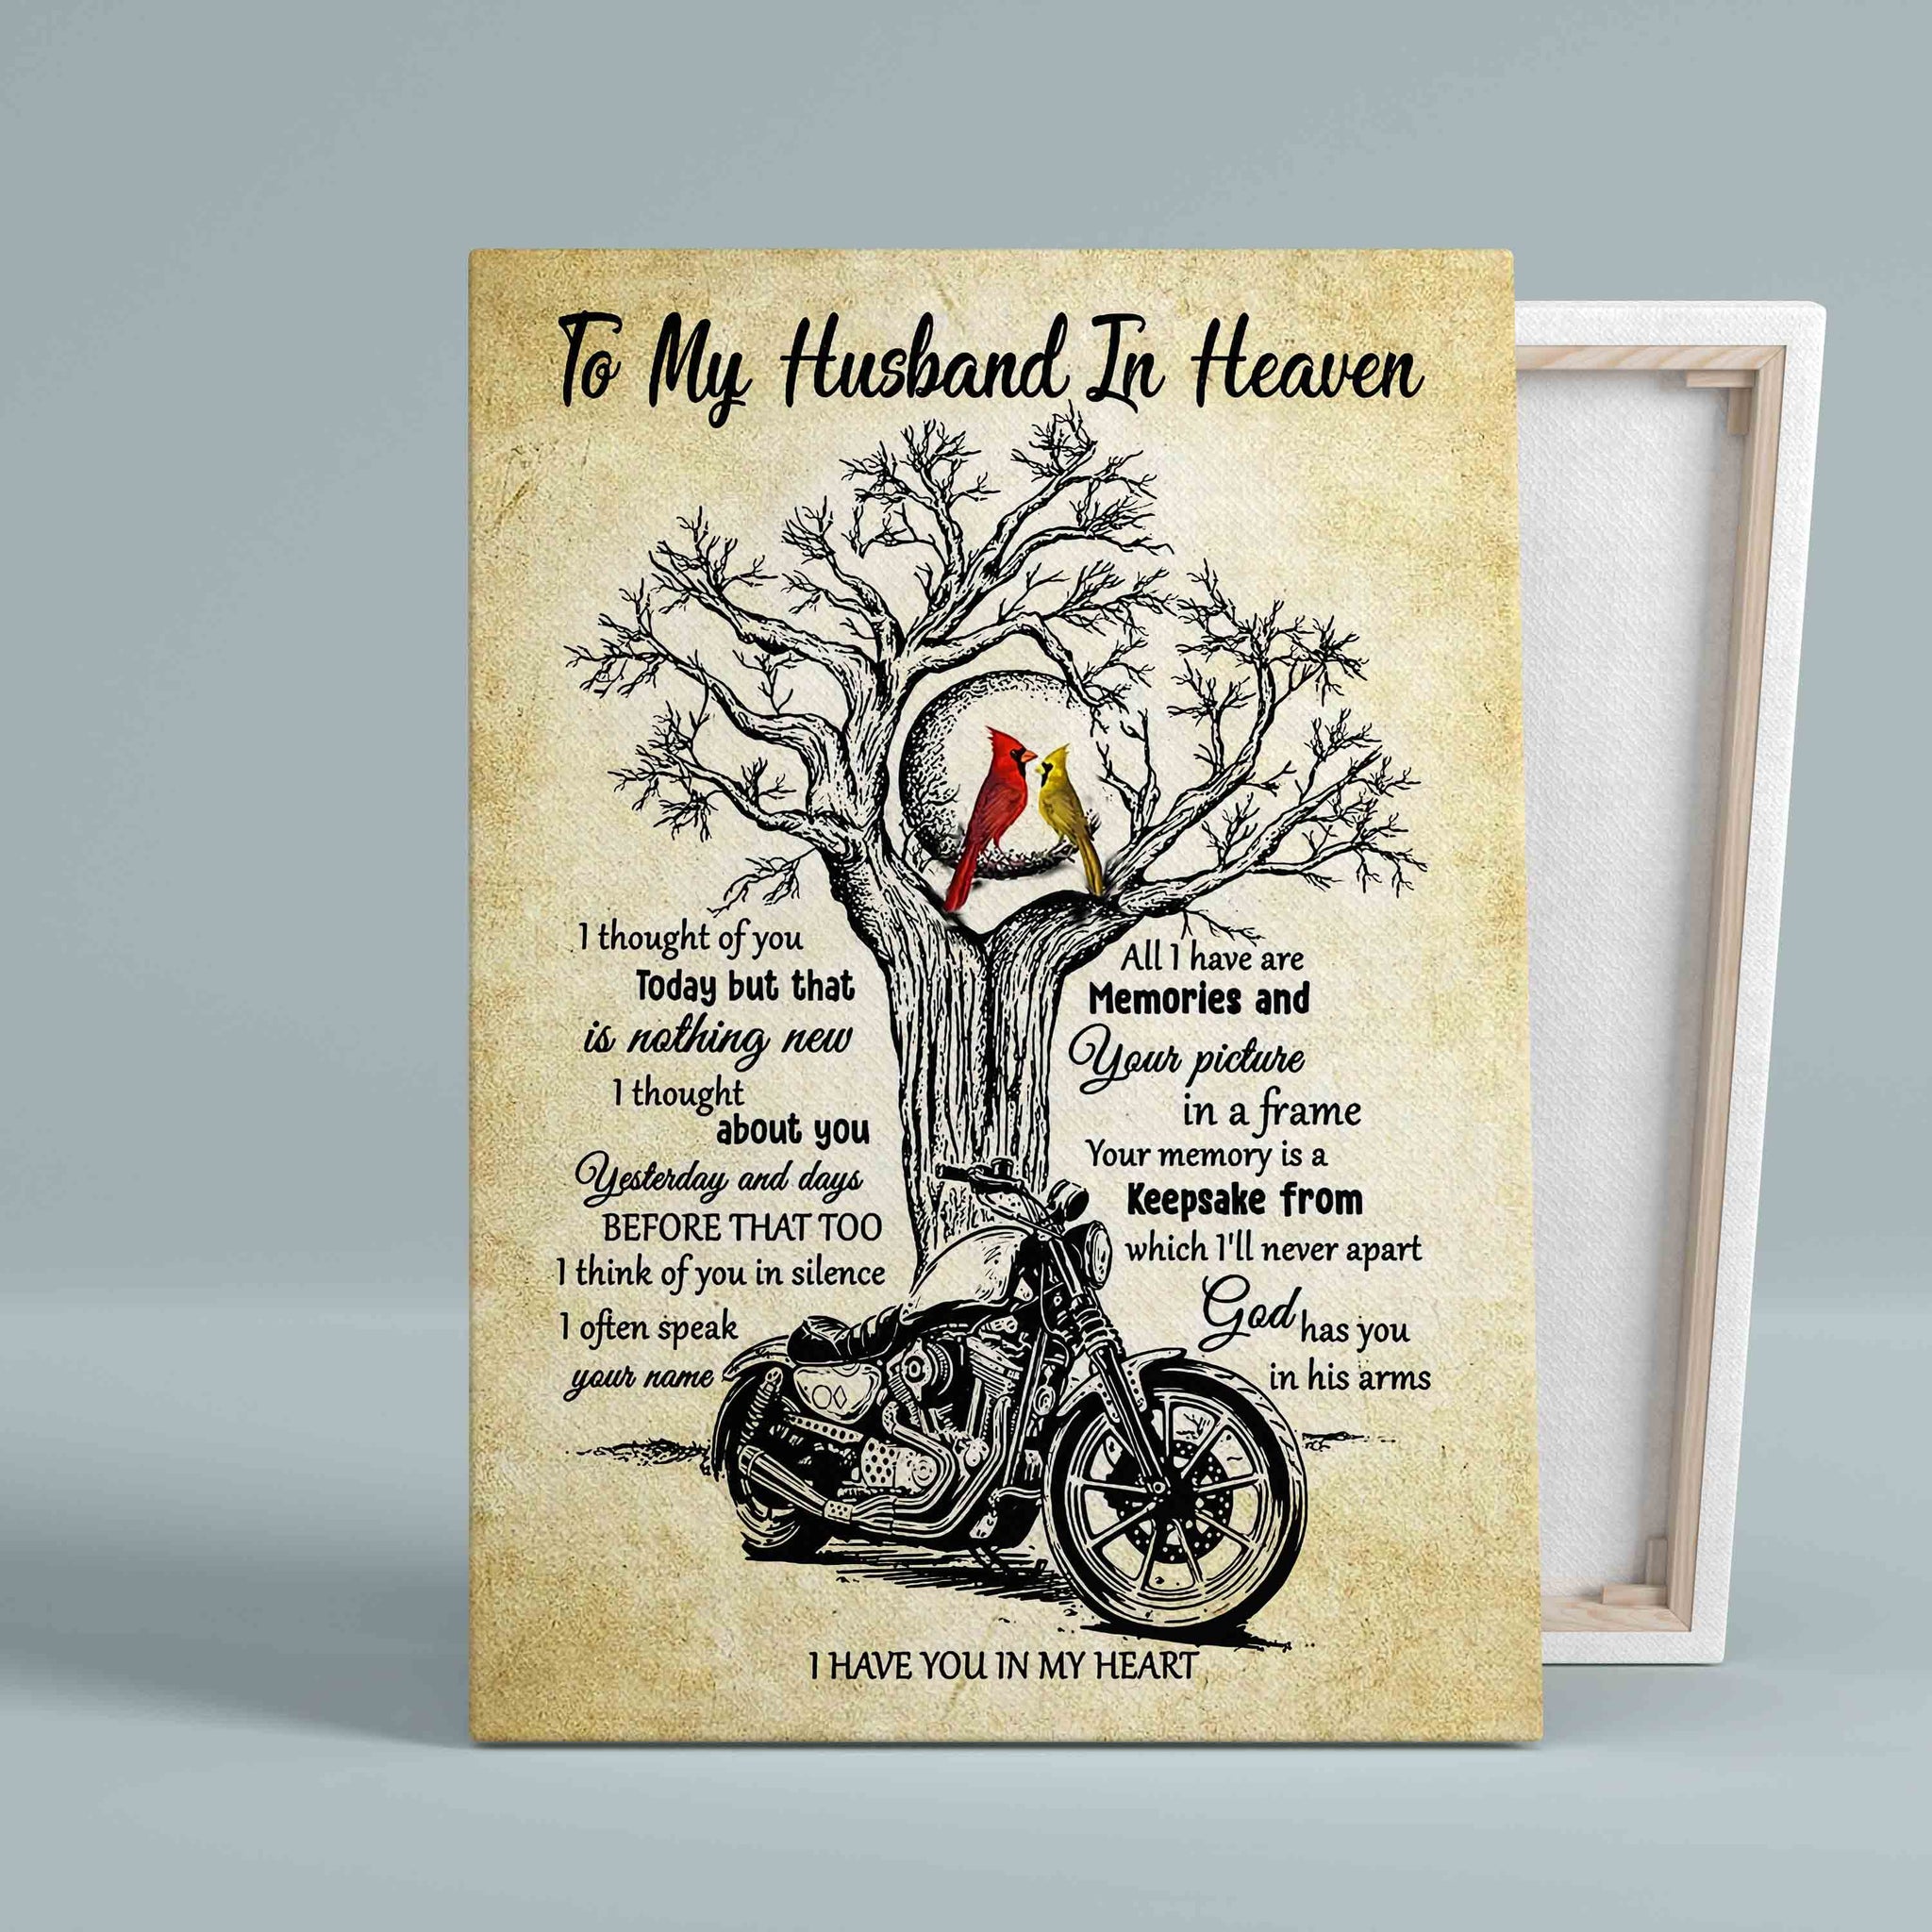 To My Husband In Heaven Canvas, I Have You In My Heart Canvas, Cardinal Canvas, Memorial Canvas